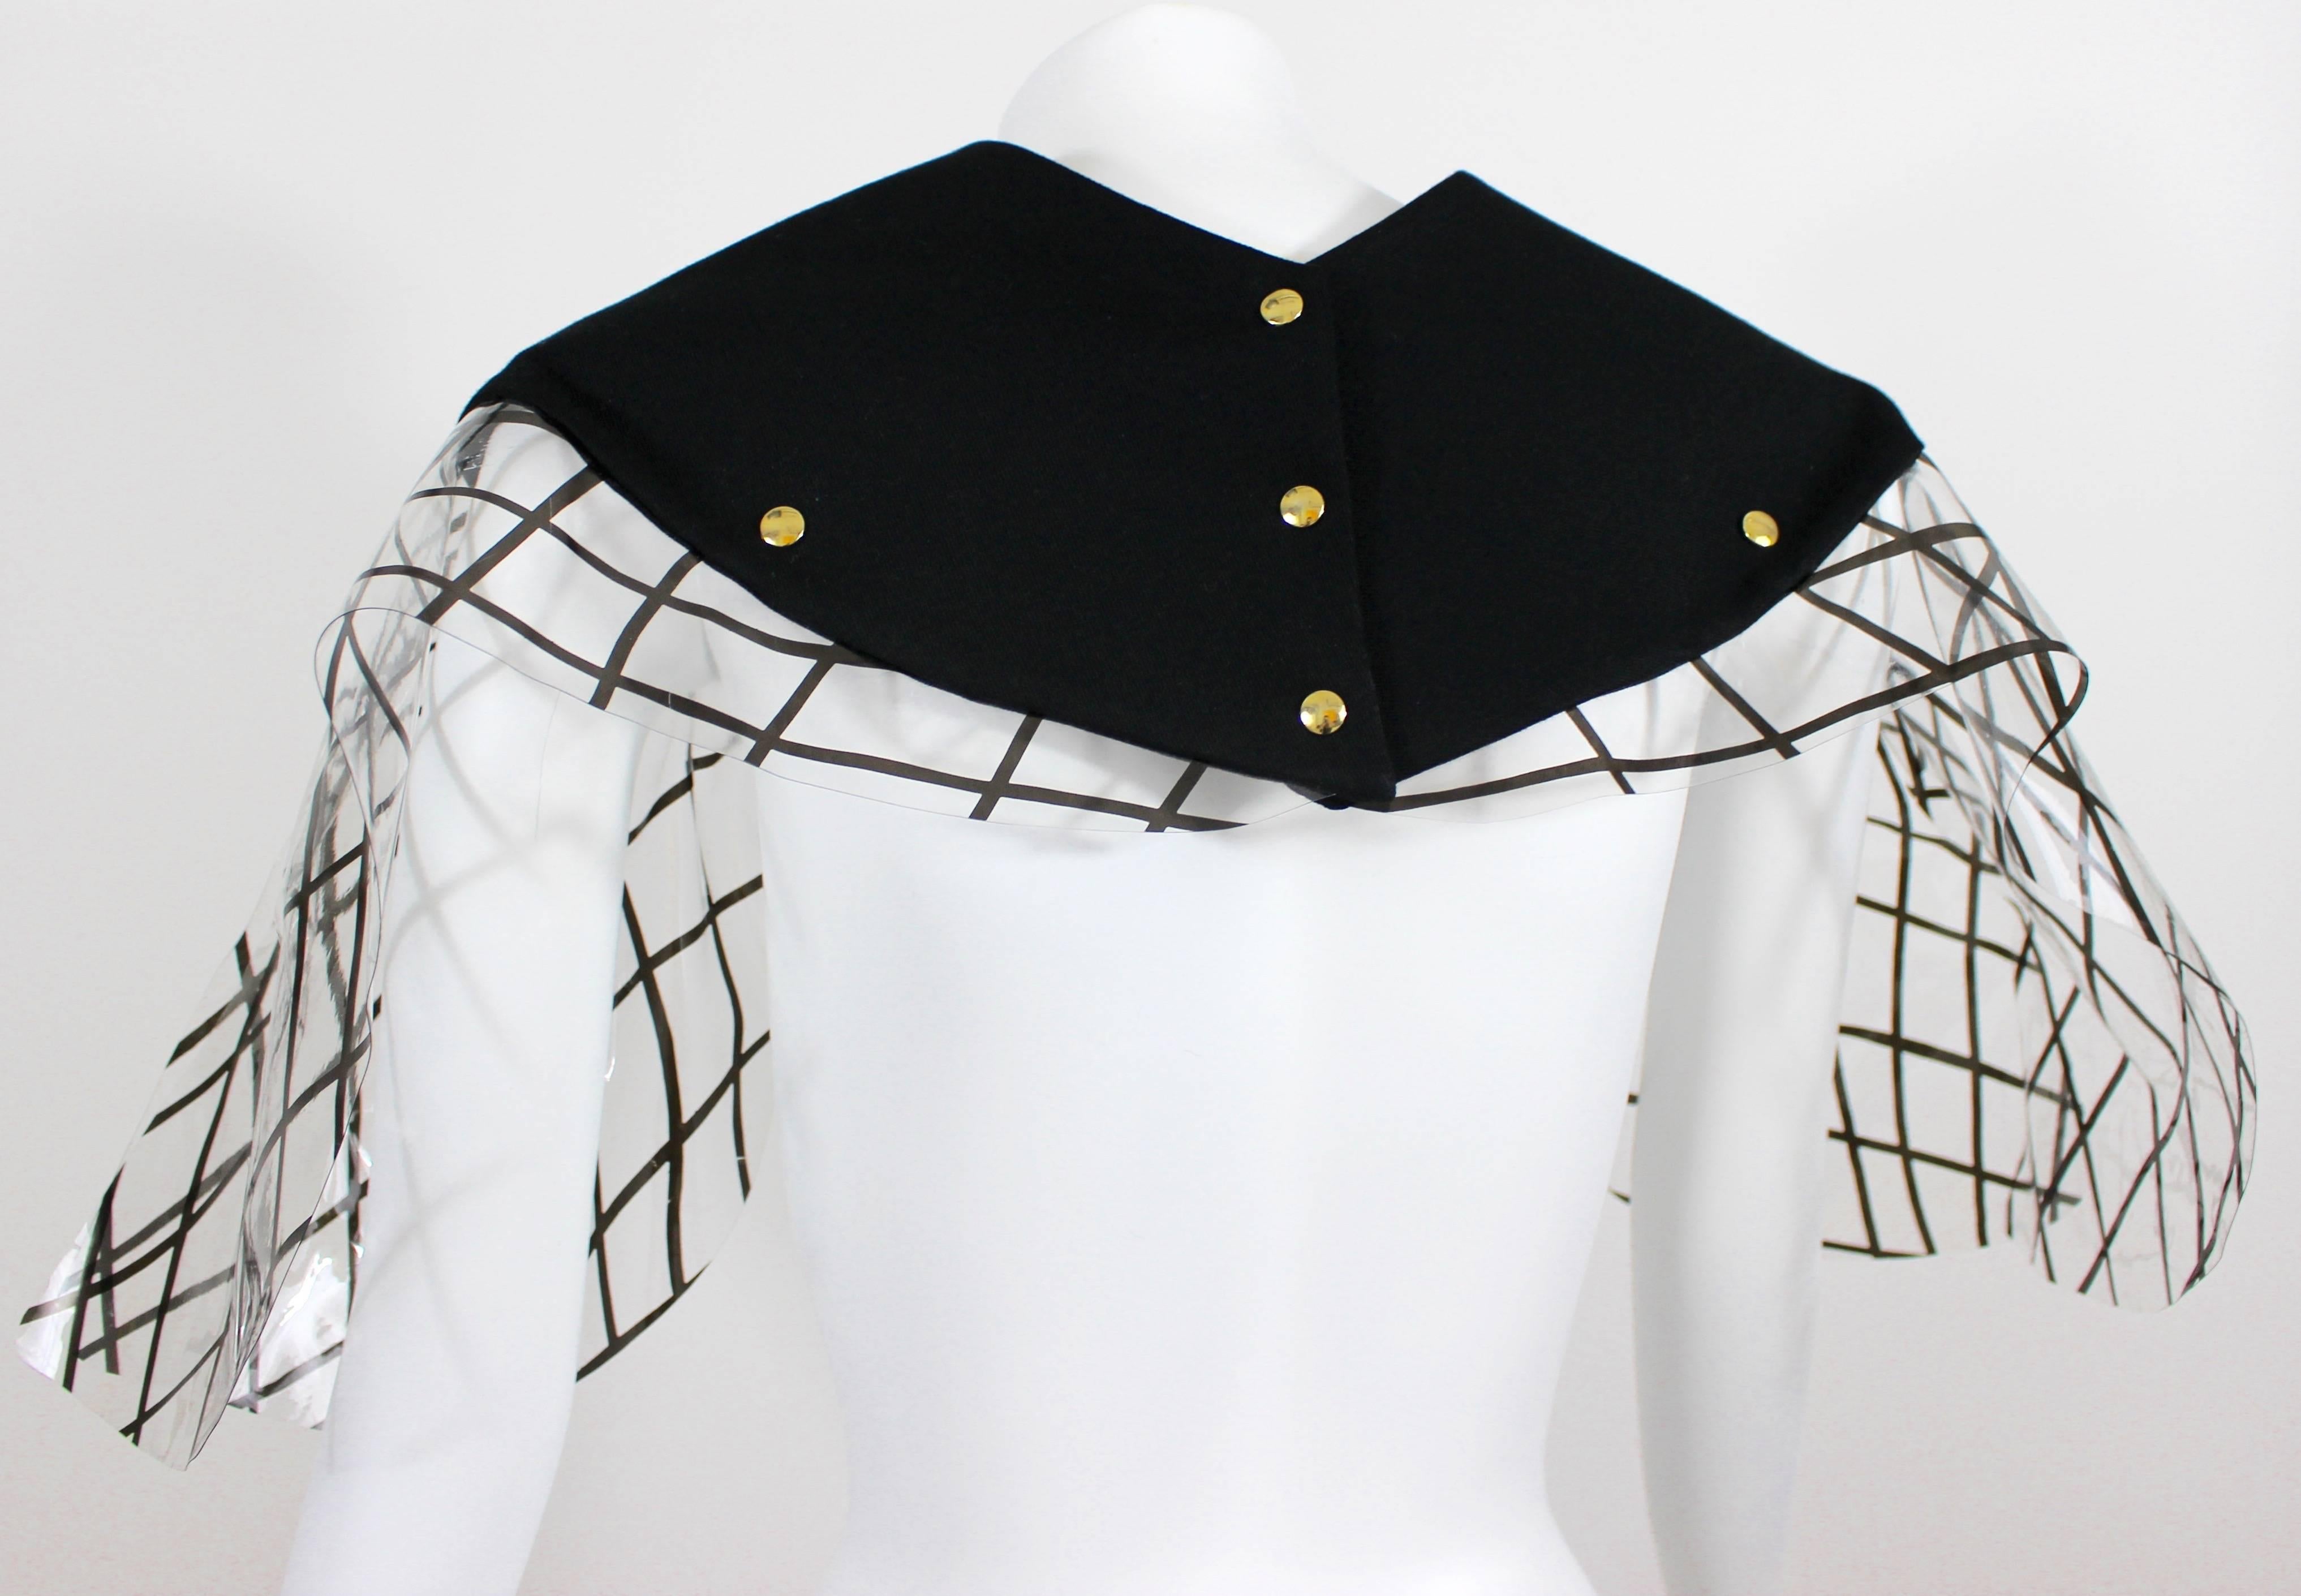 Yves Saint Laurent Black and Clear PVC Cape. Fall  2010 Runway Look #14  In Excellent Condition For Sale In Boca Raton, FL